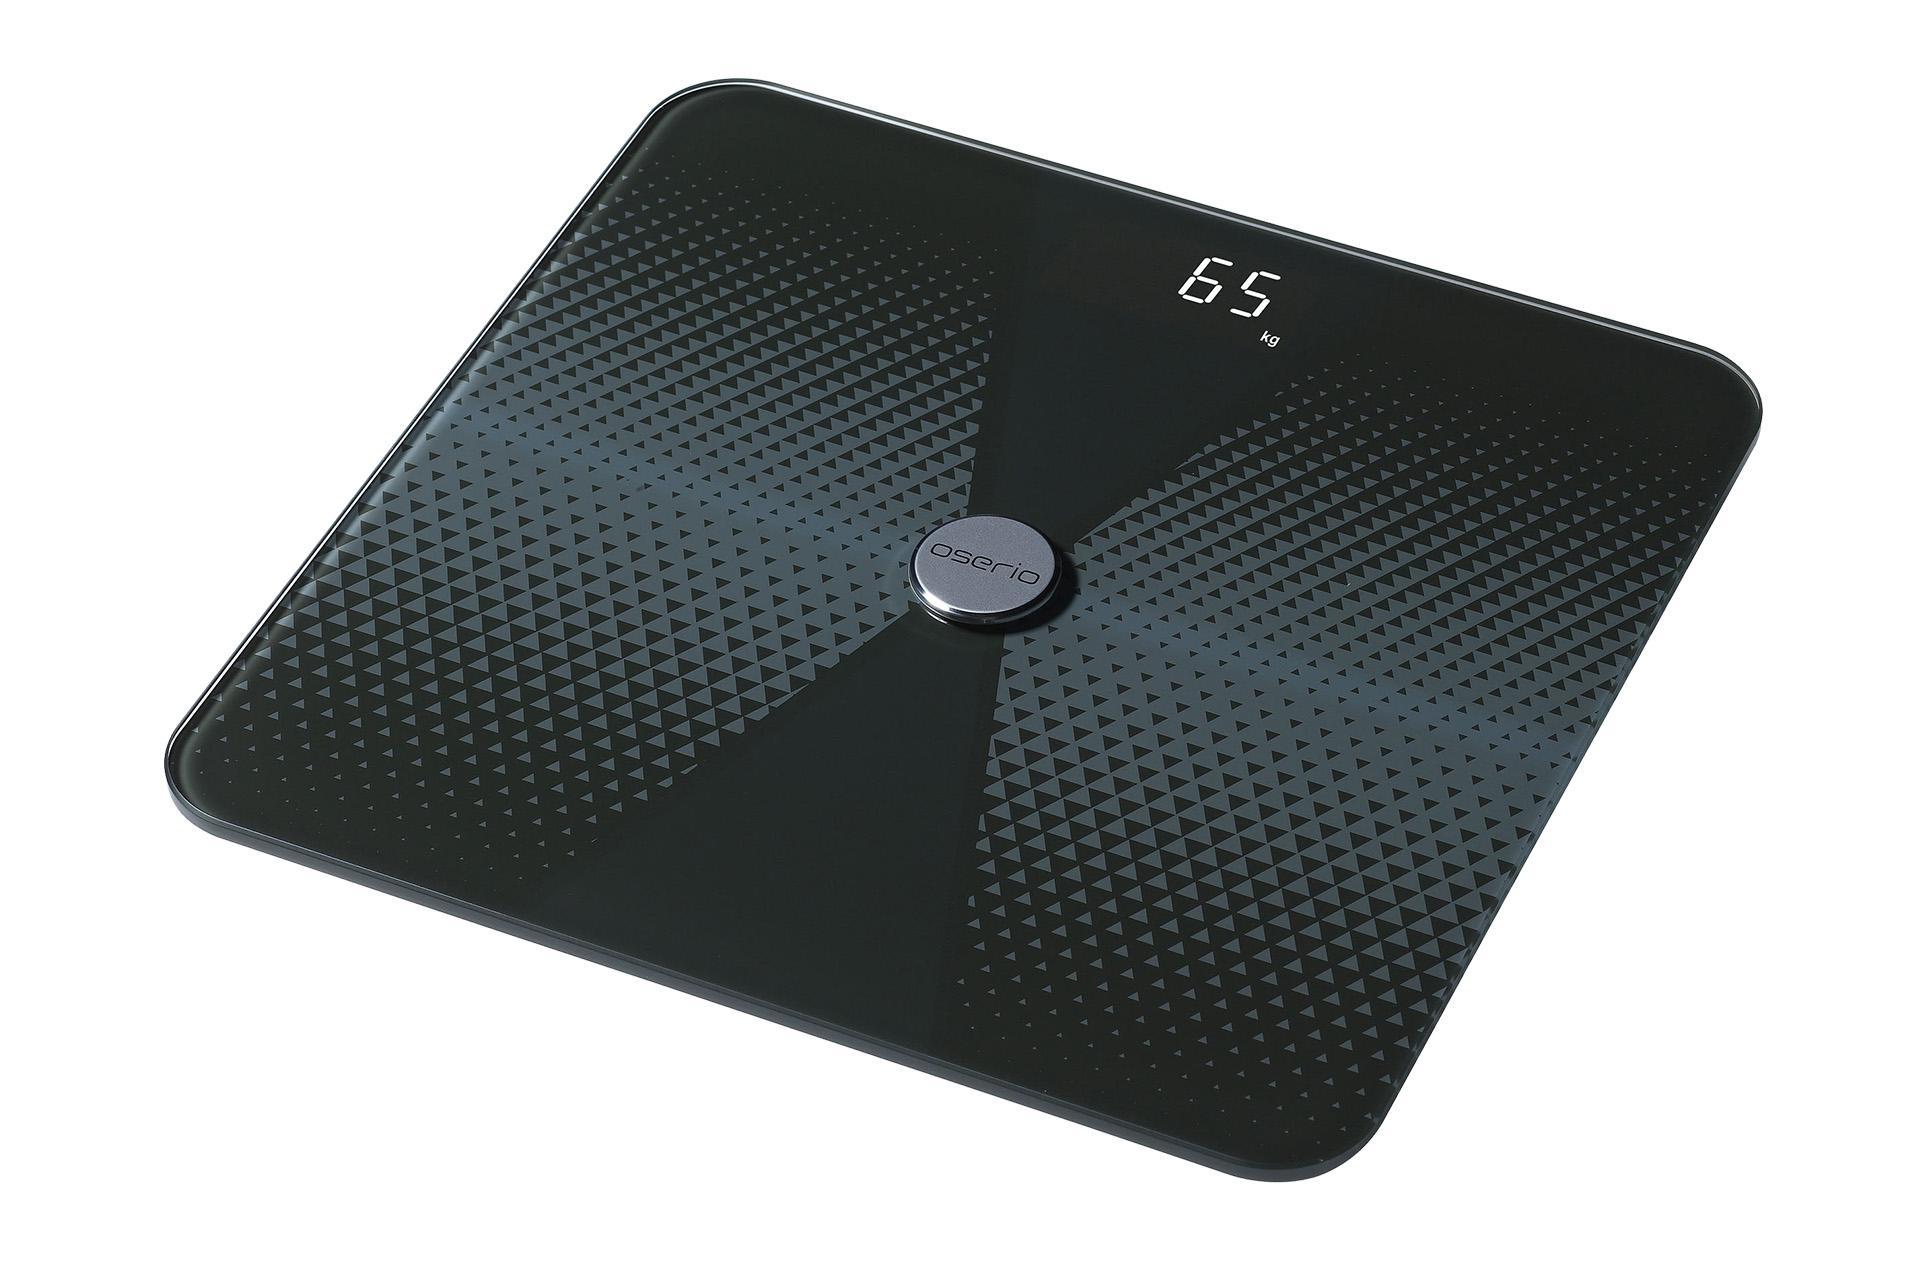 Wireless Body Composition & Cardio Scale-CHARDER ELECTRONIC CO., LTD.